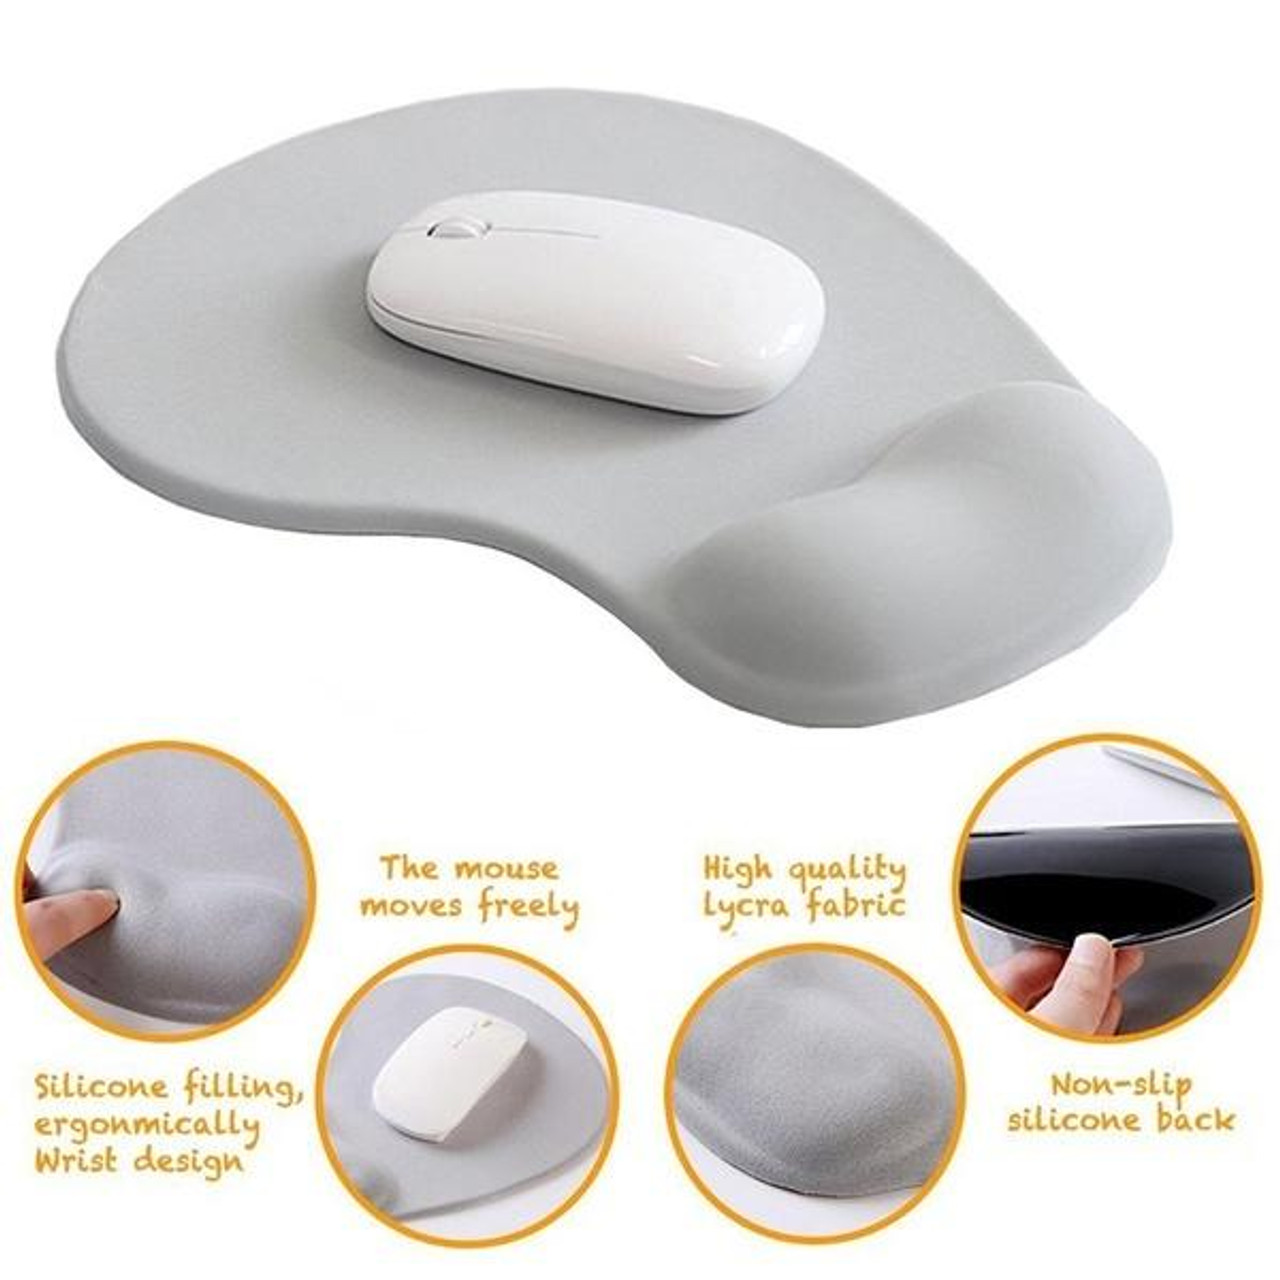 190x230mm wrist rest mouse pad, silicone